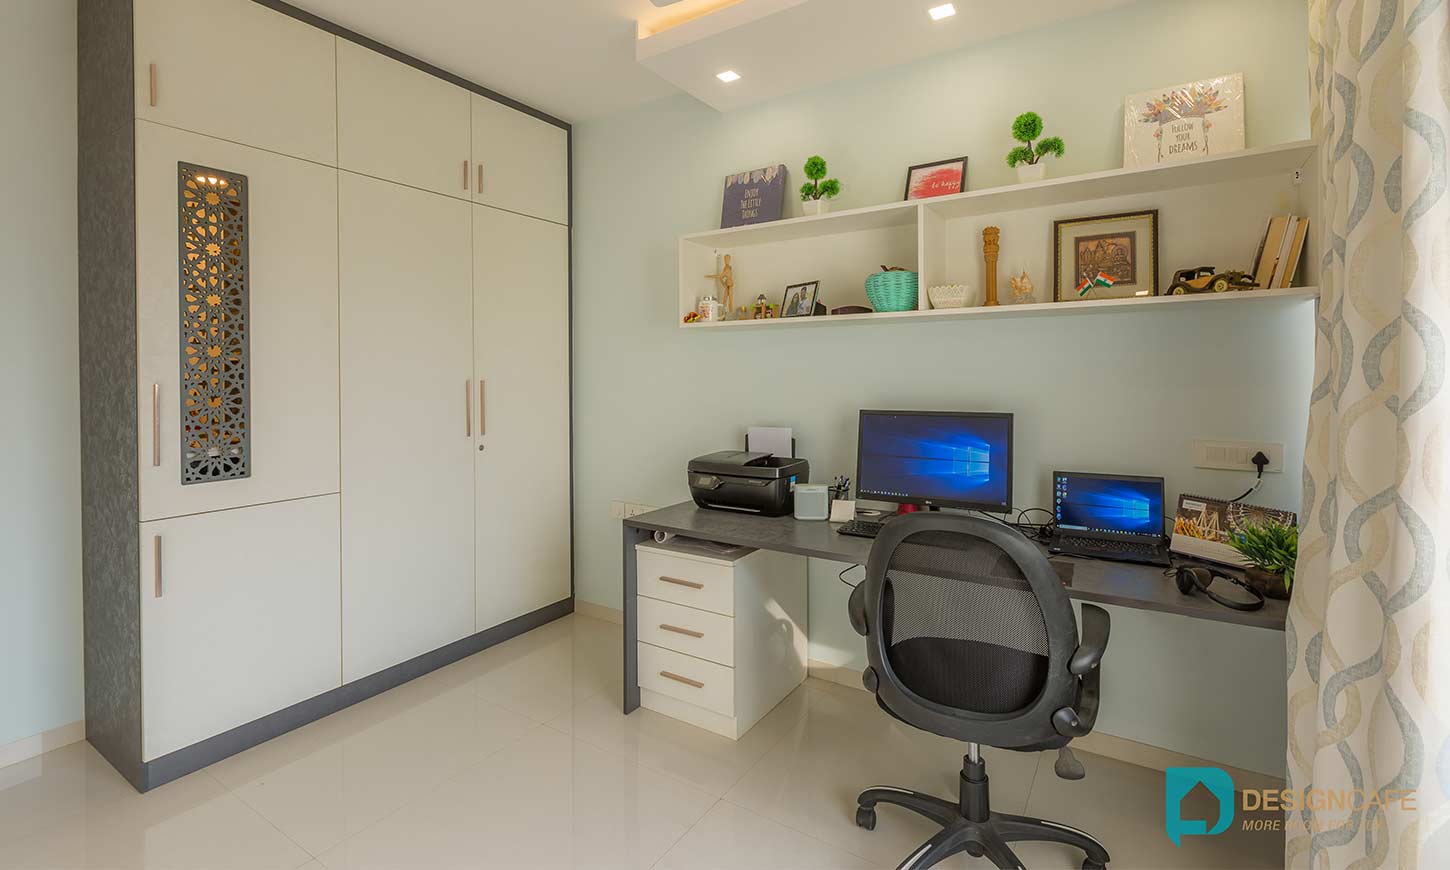 Study room designed by home interior designers in bangalore